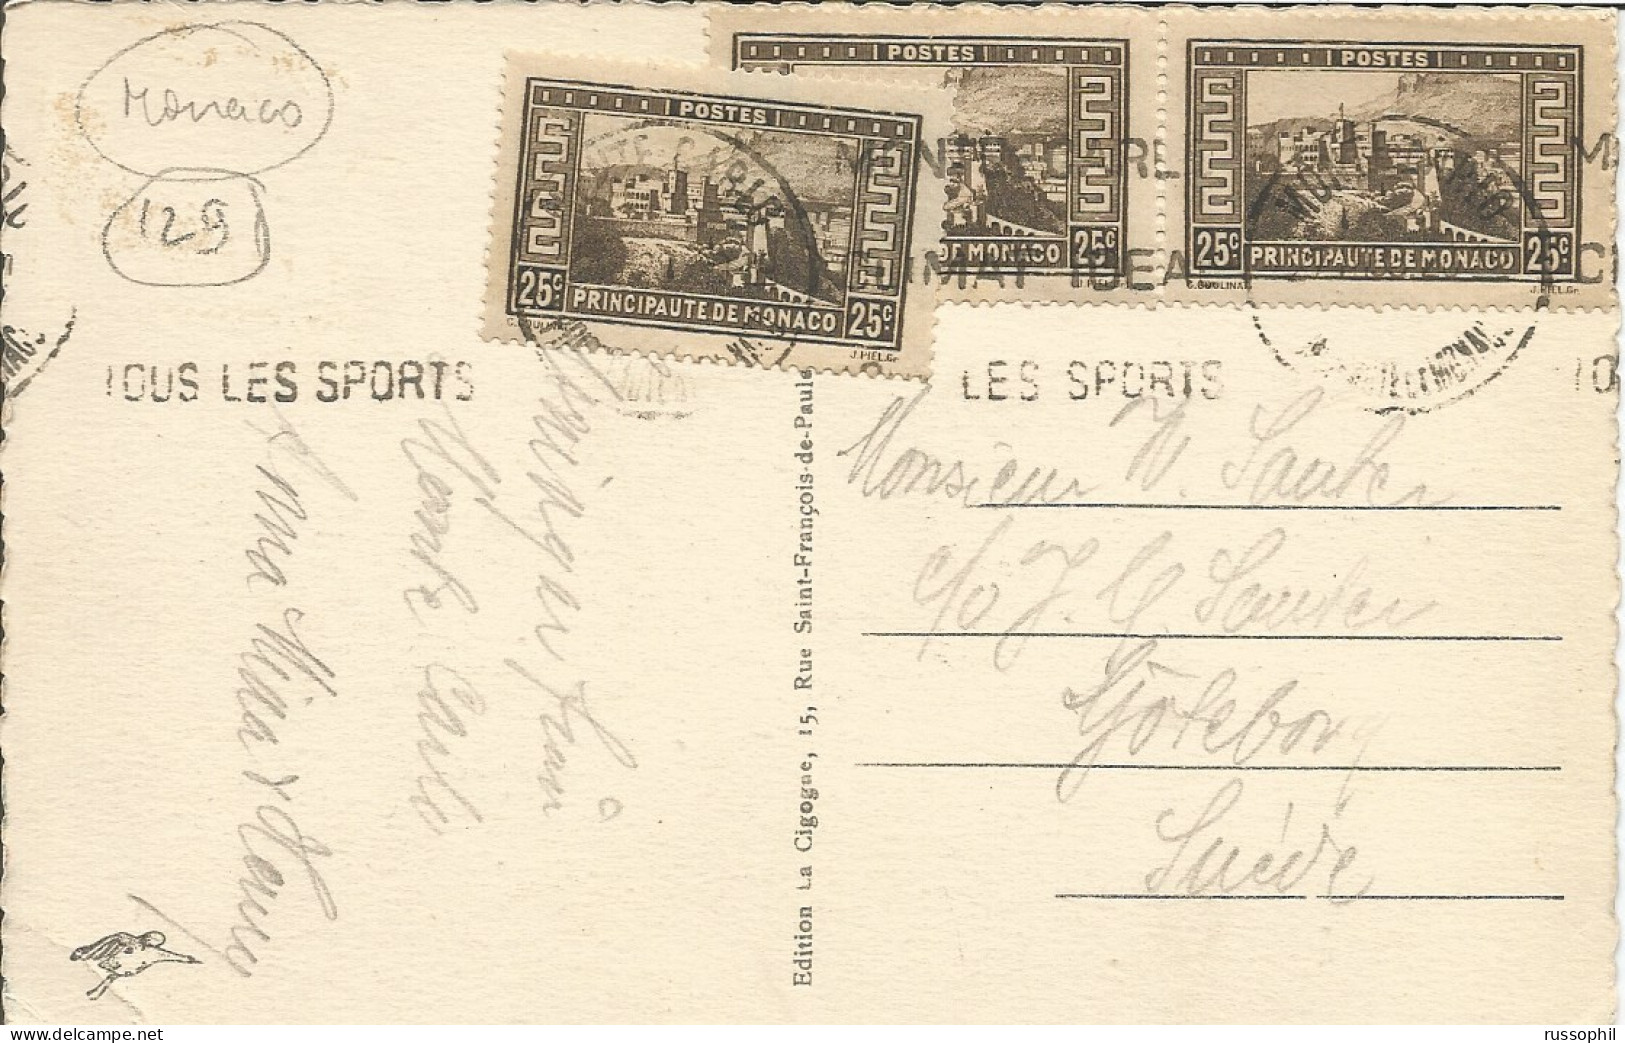 MONACO - 75 CENT FRANKING ( Yv. #121 X 3) ON PC (VIEW OF MONTE CARLO) TO SWEDEN - 1938 - Lettres & Documents